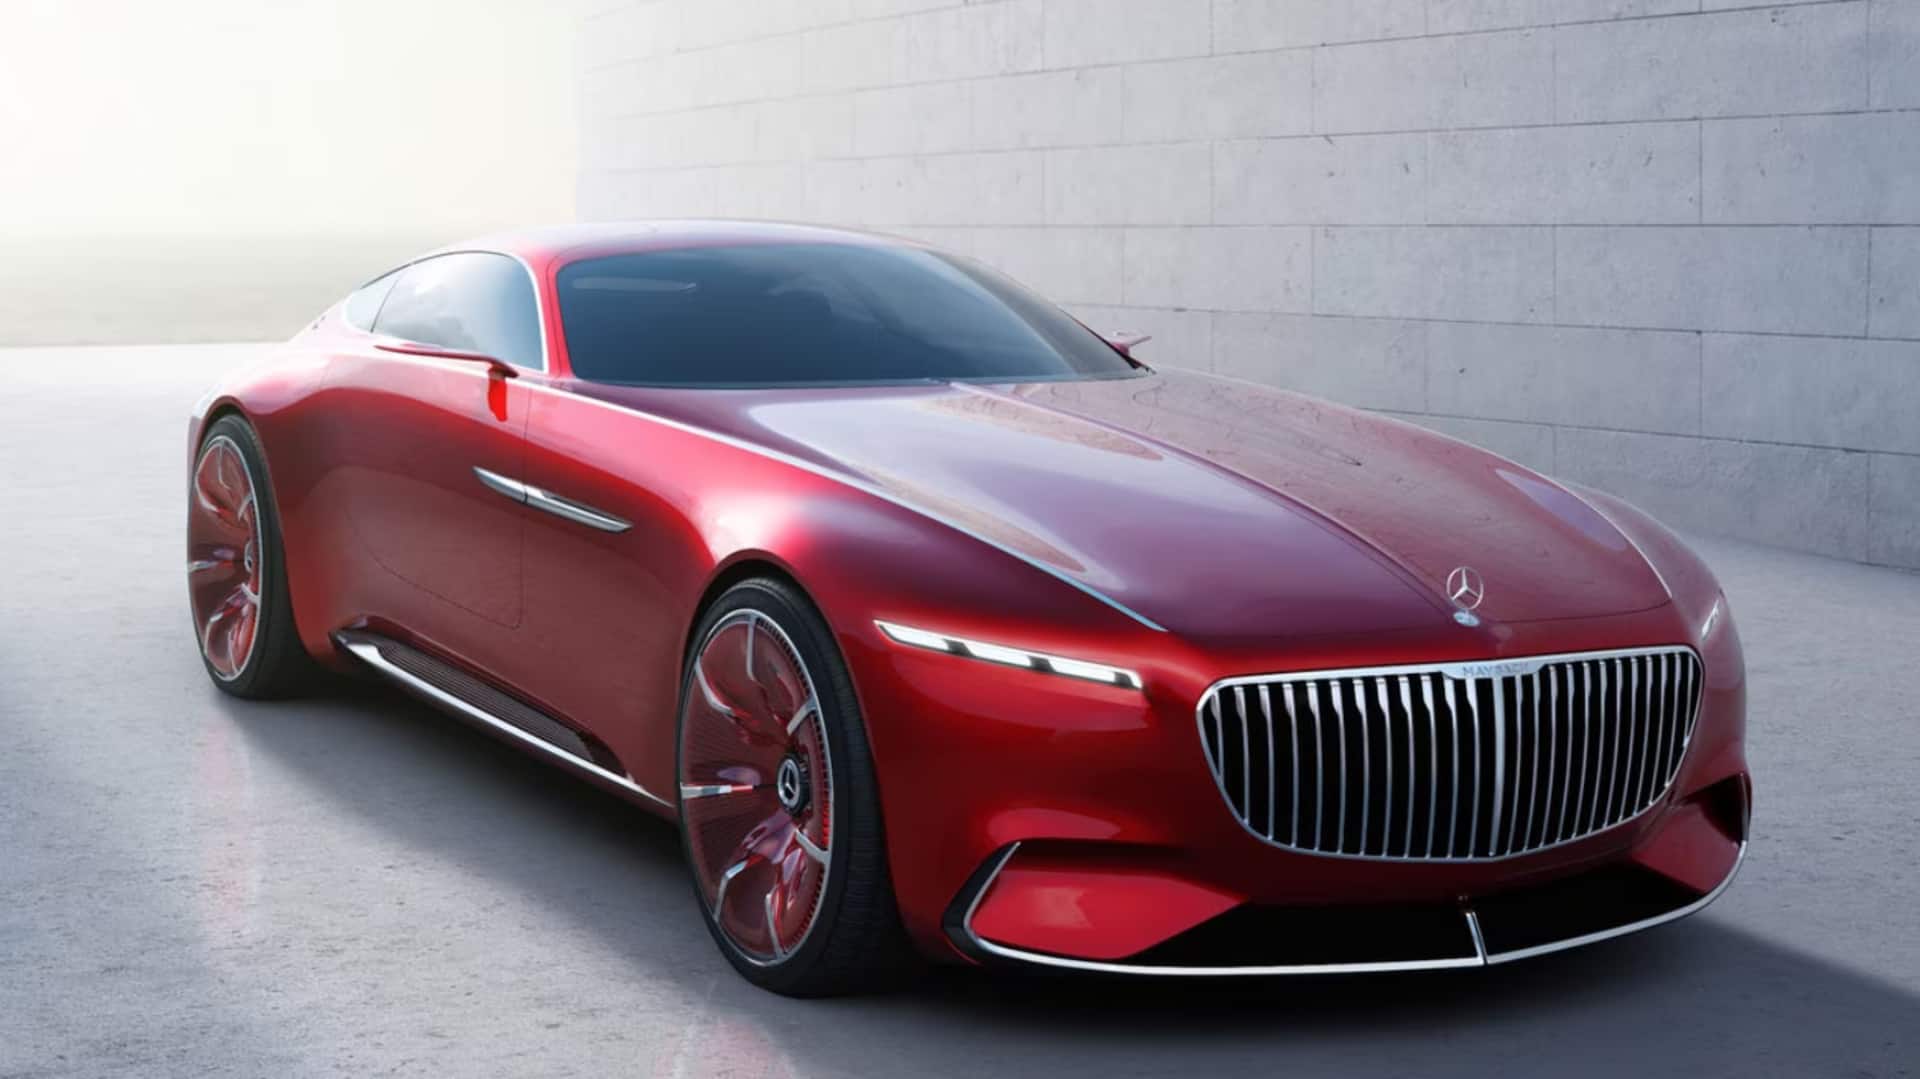 Vision Mercedes-Maybach 6 concept arrives in India on October 11